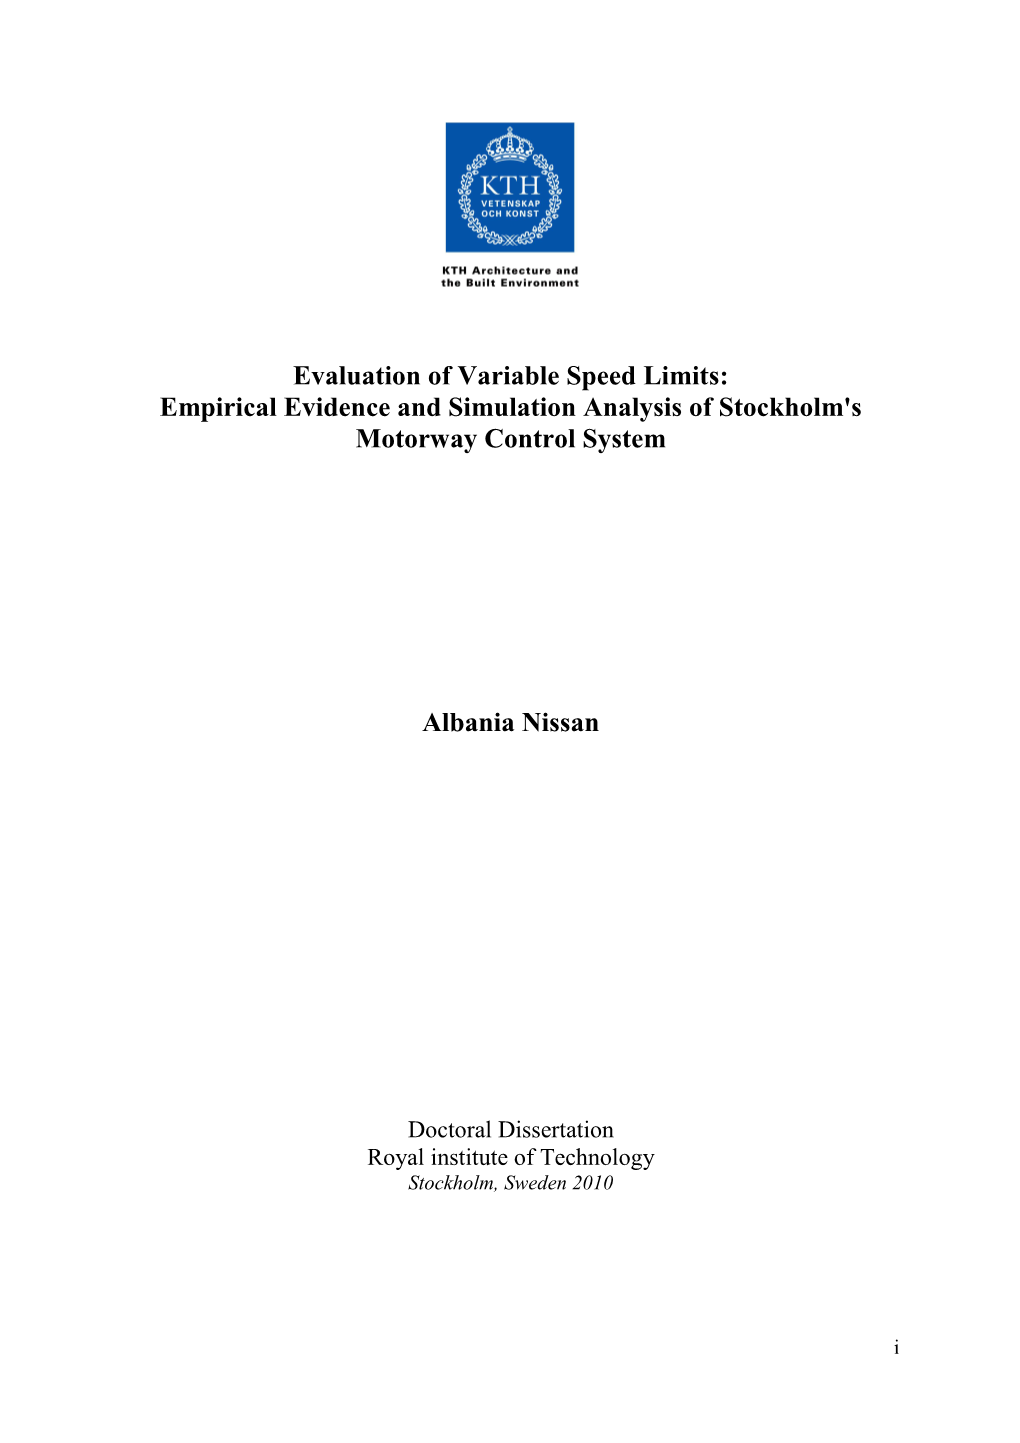 Evaluation of Variable Speed Limits: Empirical Evidence and Simulation Analysis of Stockholm's Motorway Control System